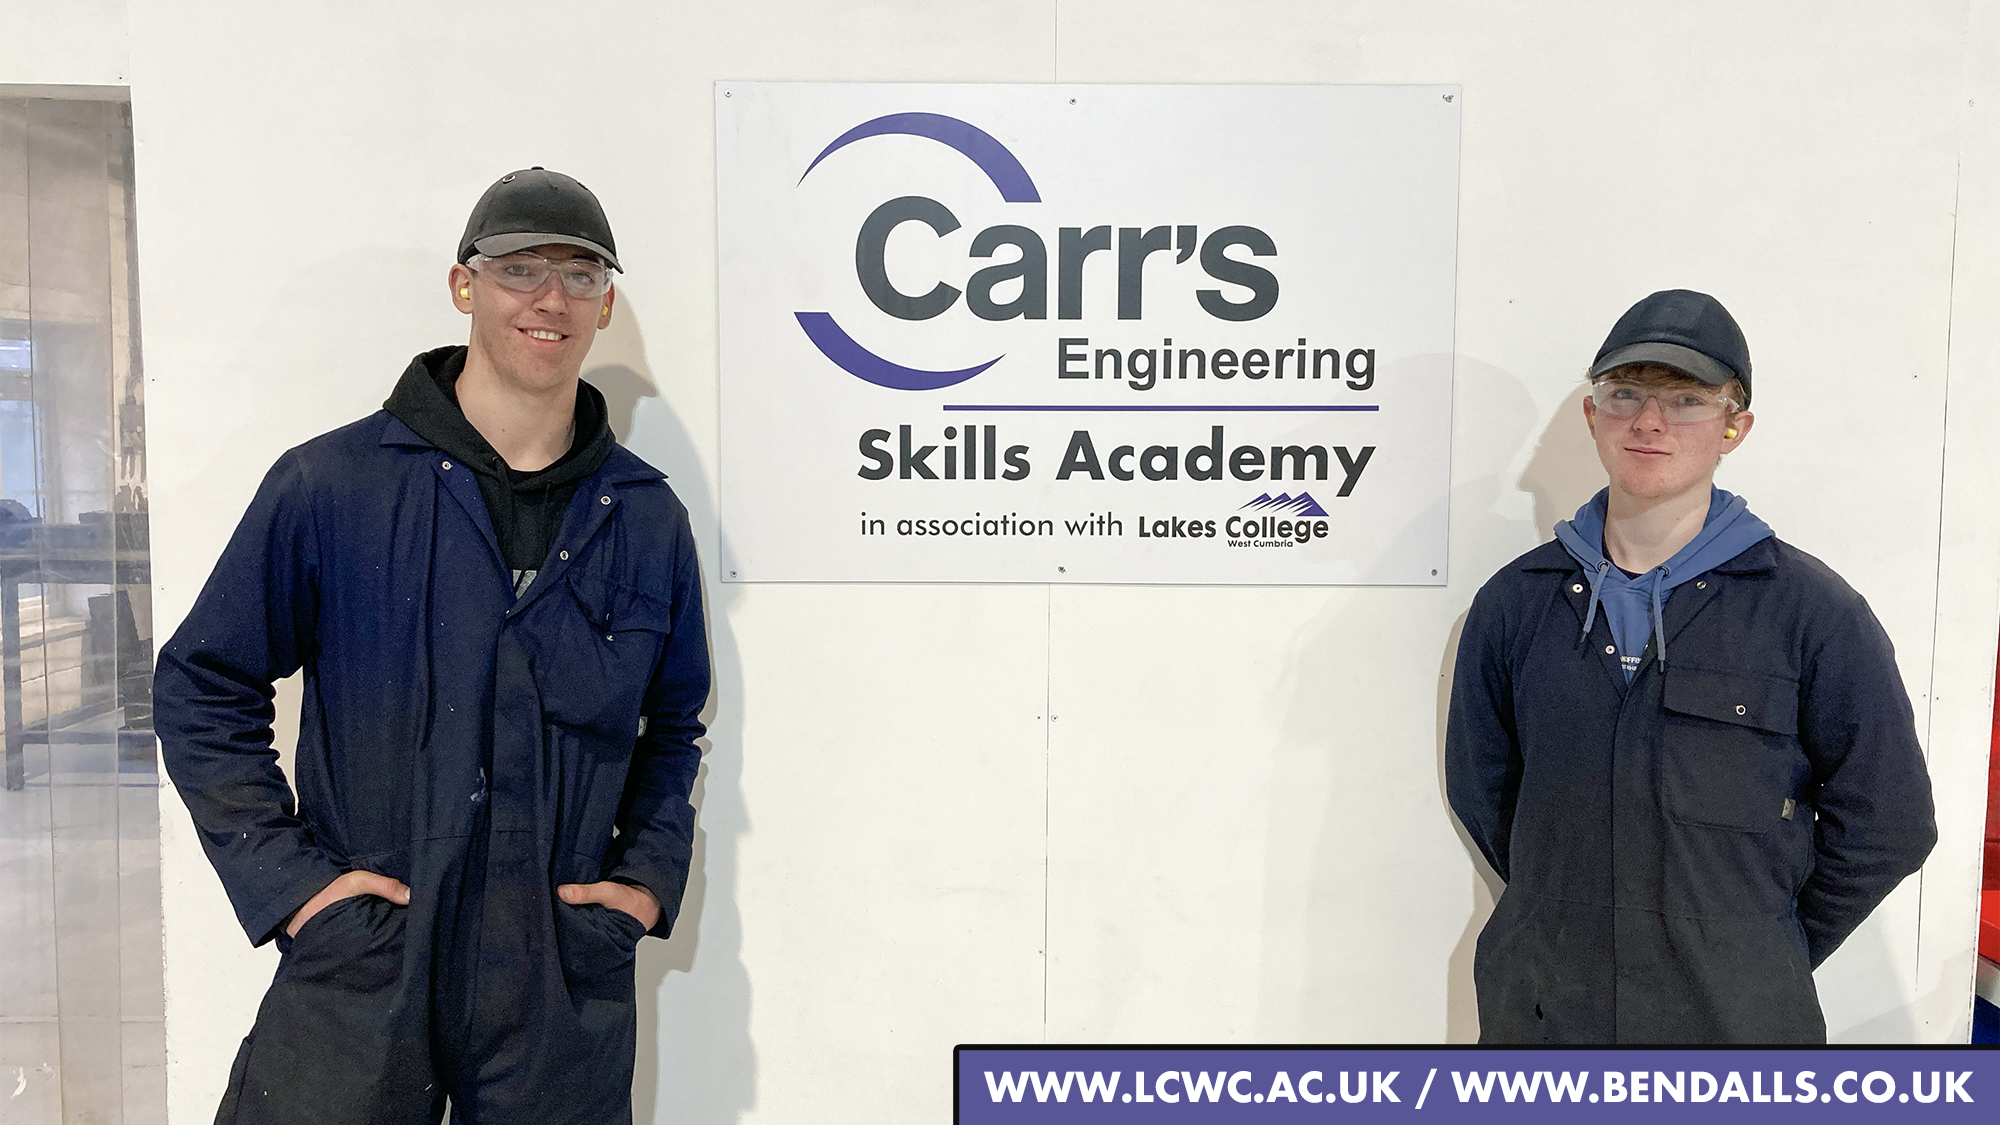 Two apprentices stand next to a sign for the Carr's Engineering Skills Academy in association with Lakes College